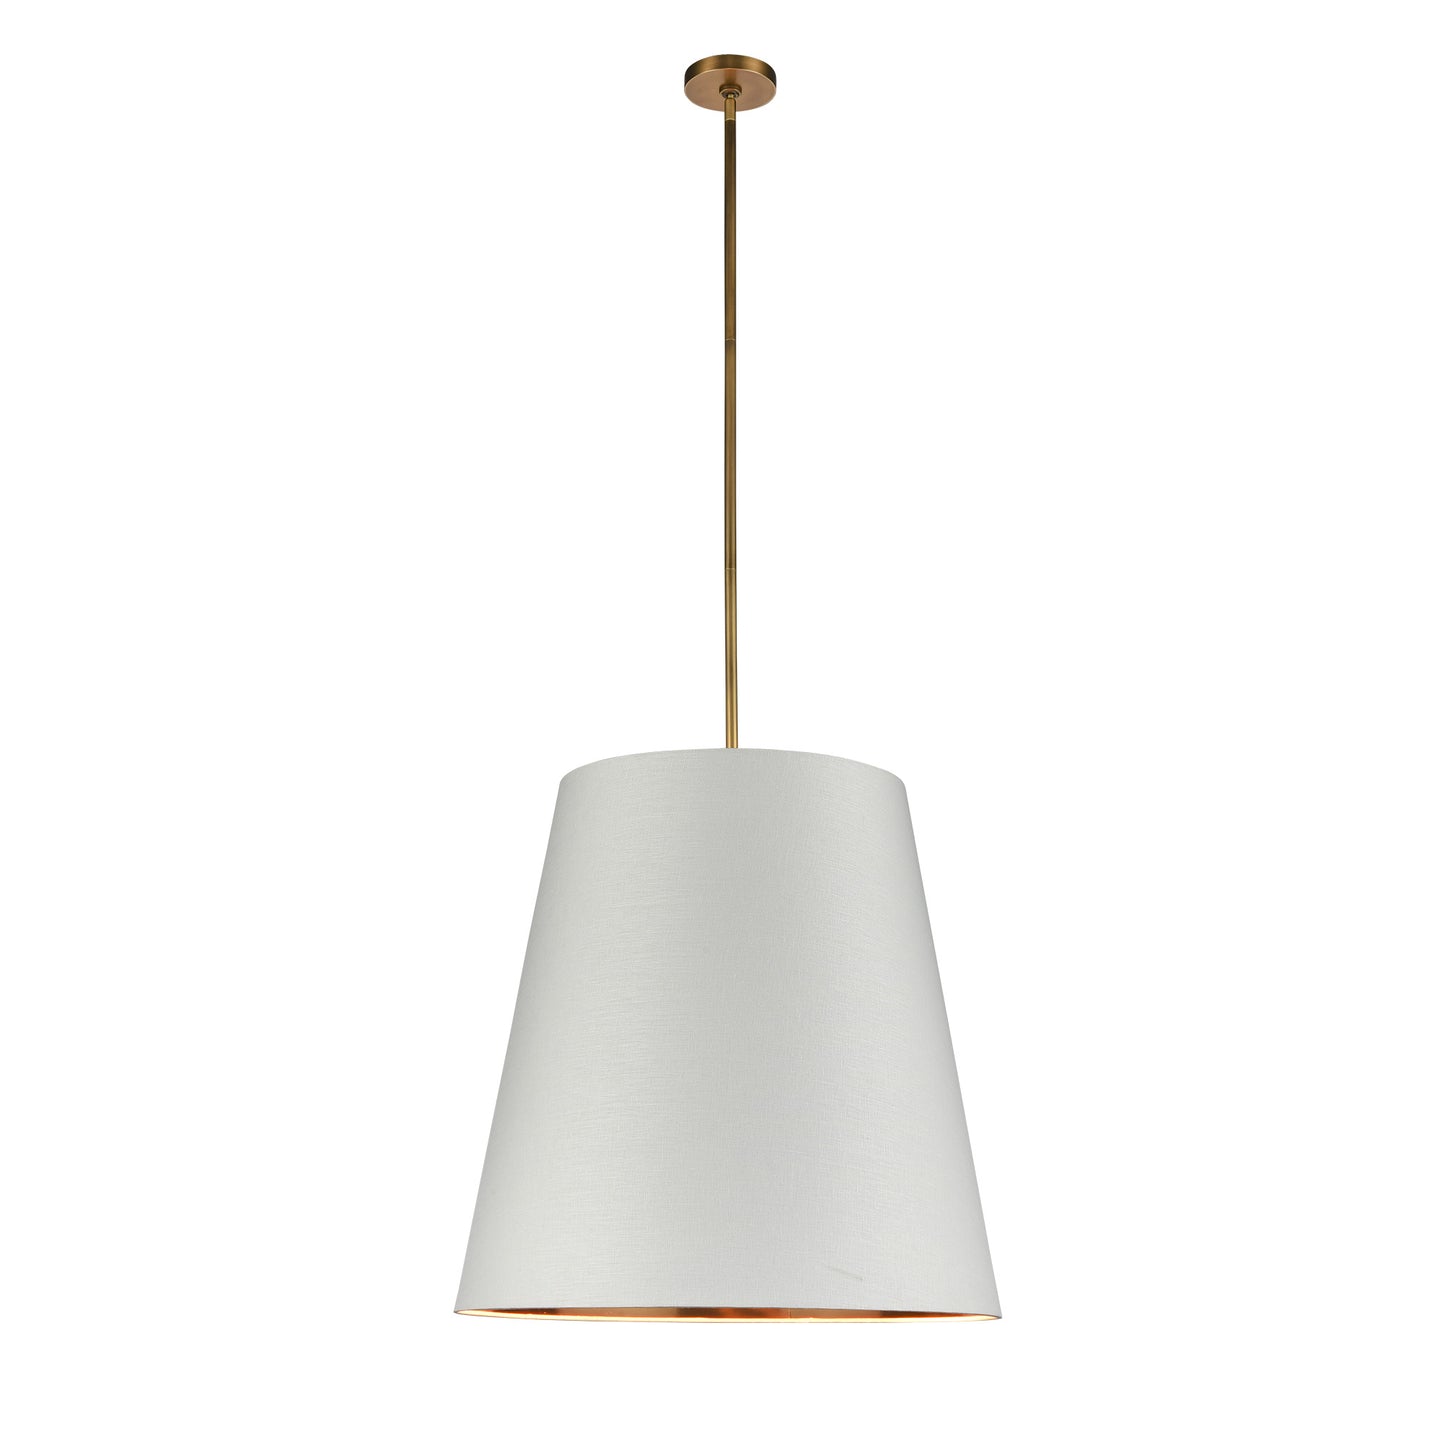 PD311025VBWG Calor 3 Light 25-1/2" Vintage Brass With White Linen And Gold Parchment Shade Pendant